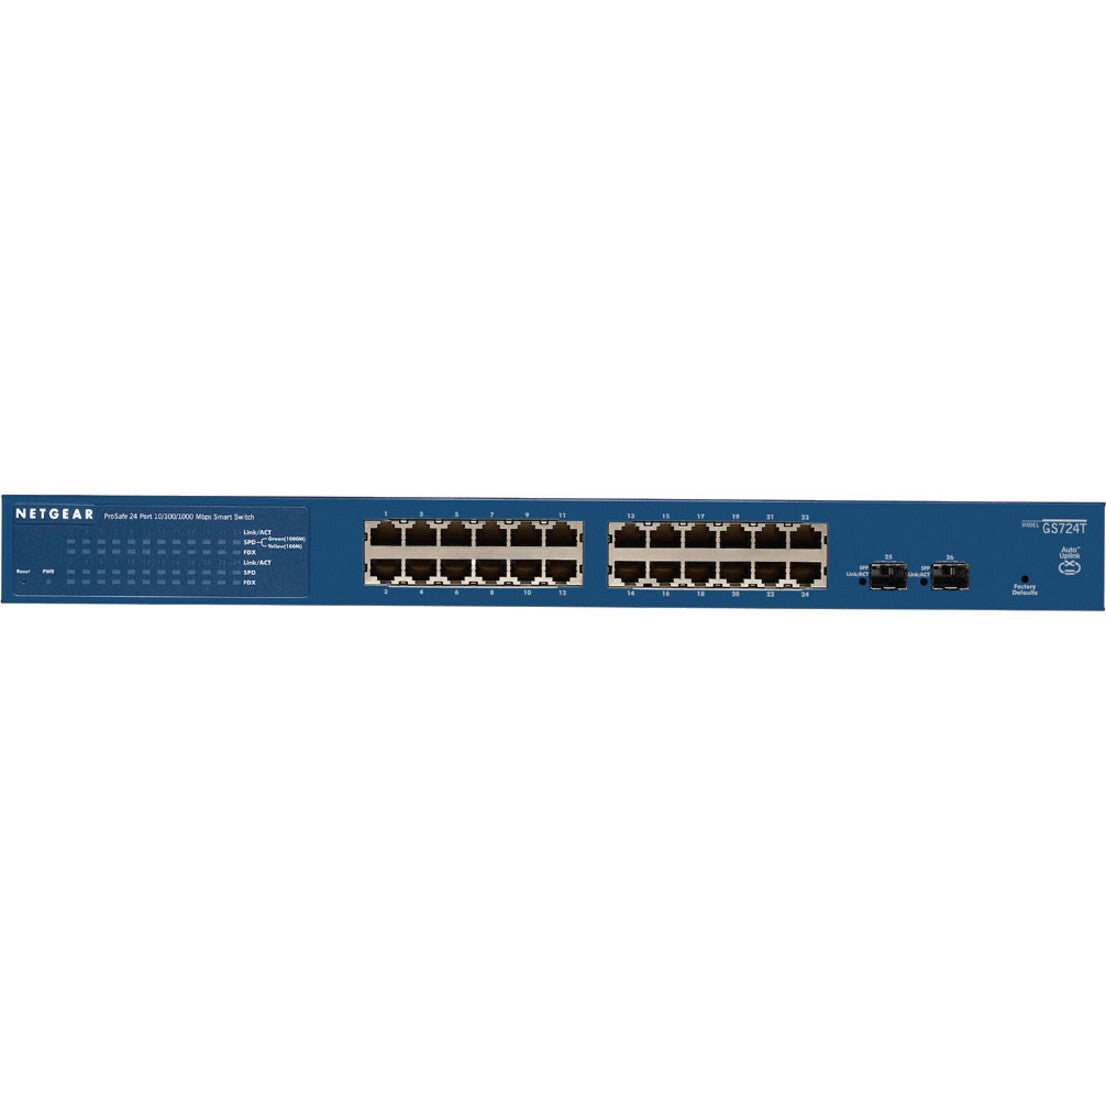 NETGEAR GS724T-400NAS ProSafe 24-Port Gigabit Smart Switch, Reliable and Easy-to-Use Ethernet Switch